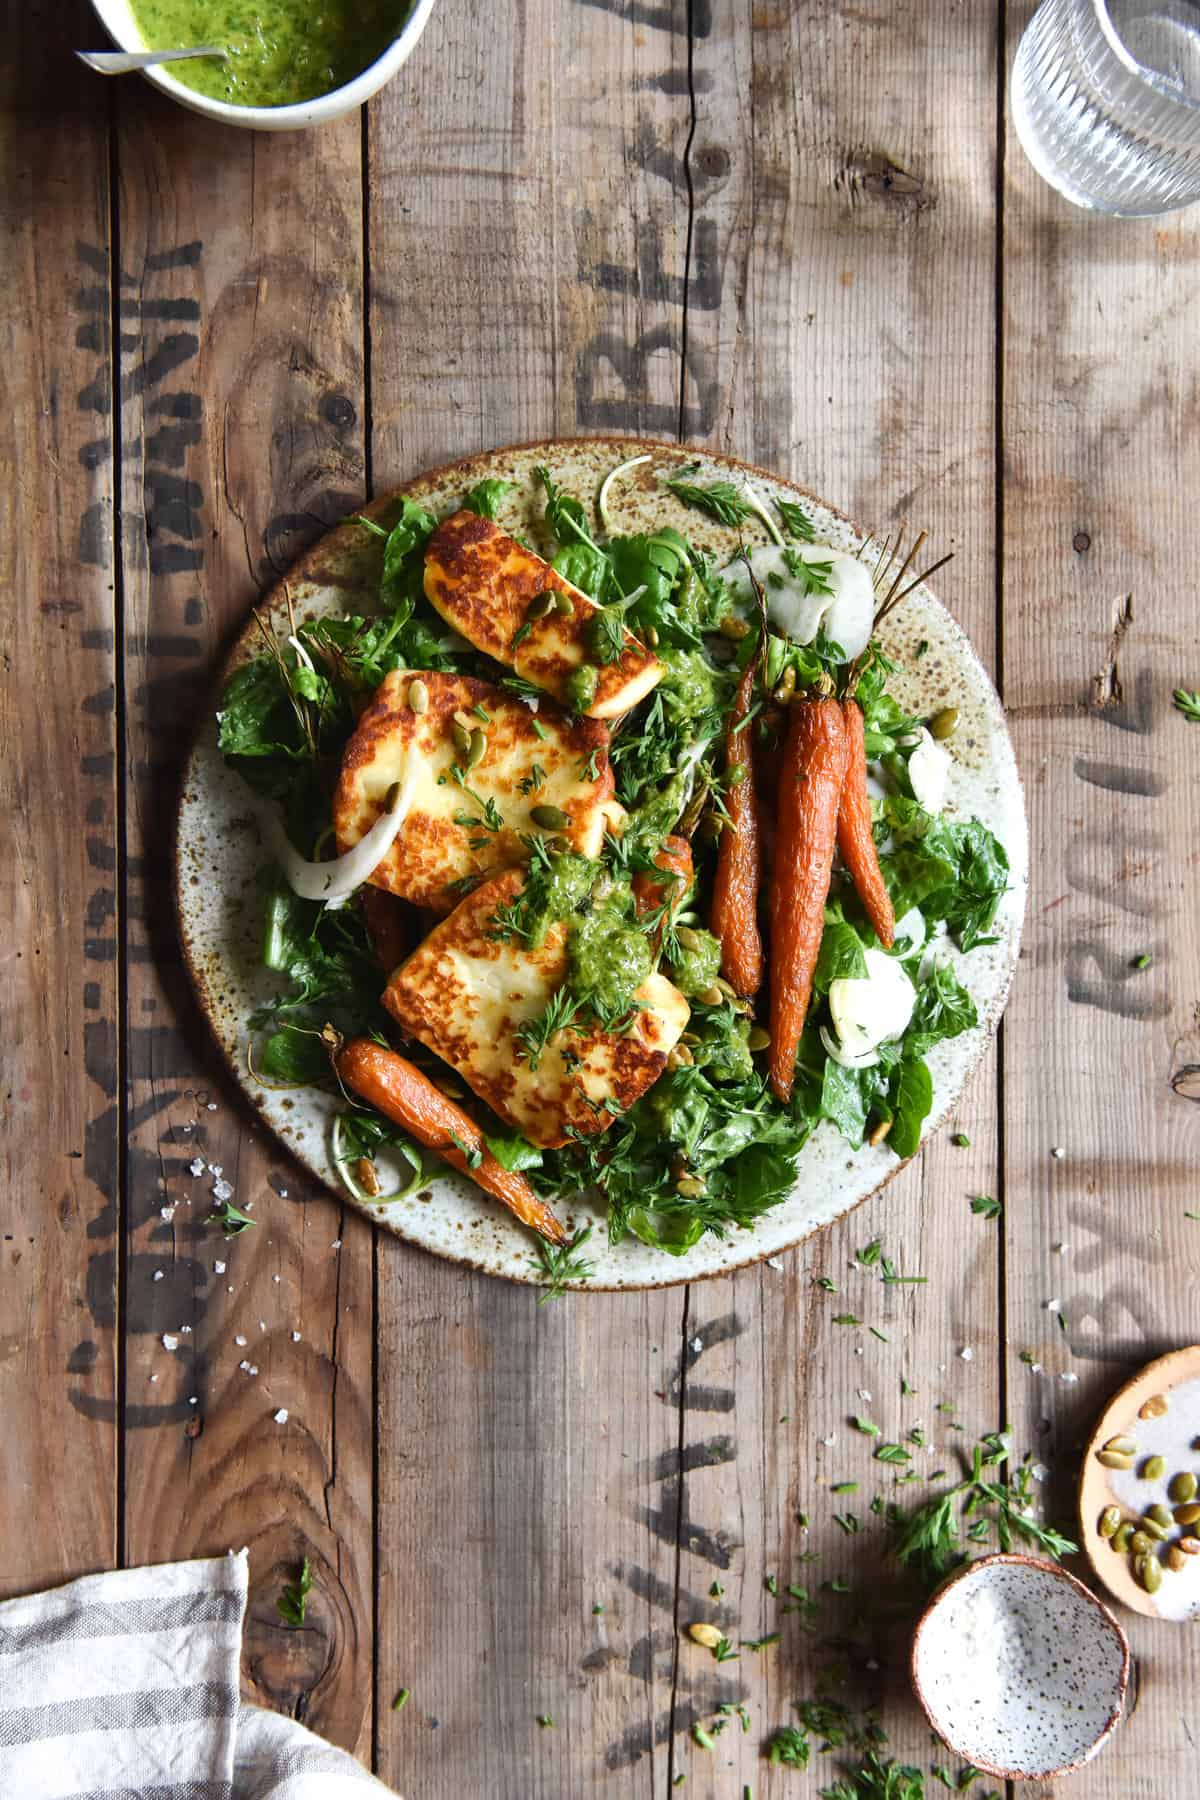 An aerial view of a plate of honey roasted carrot and haloumi salad with greens and a herb sauce. The salad is plated on a white ceramic plate atop a wooden table, and is surrounded by scattered herbs, pinch bowls and water glasses